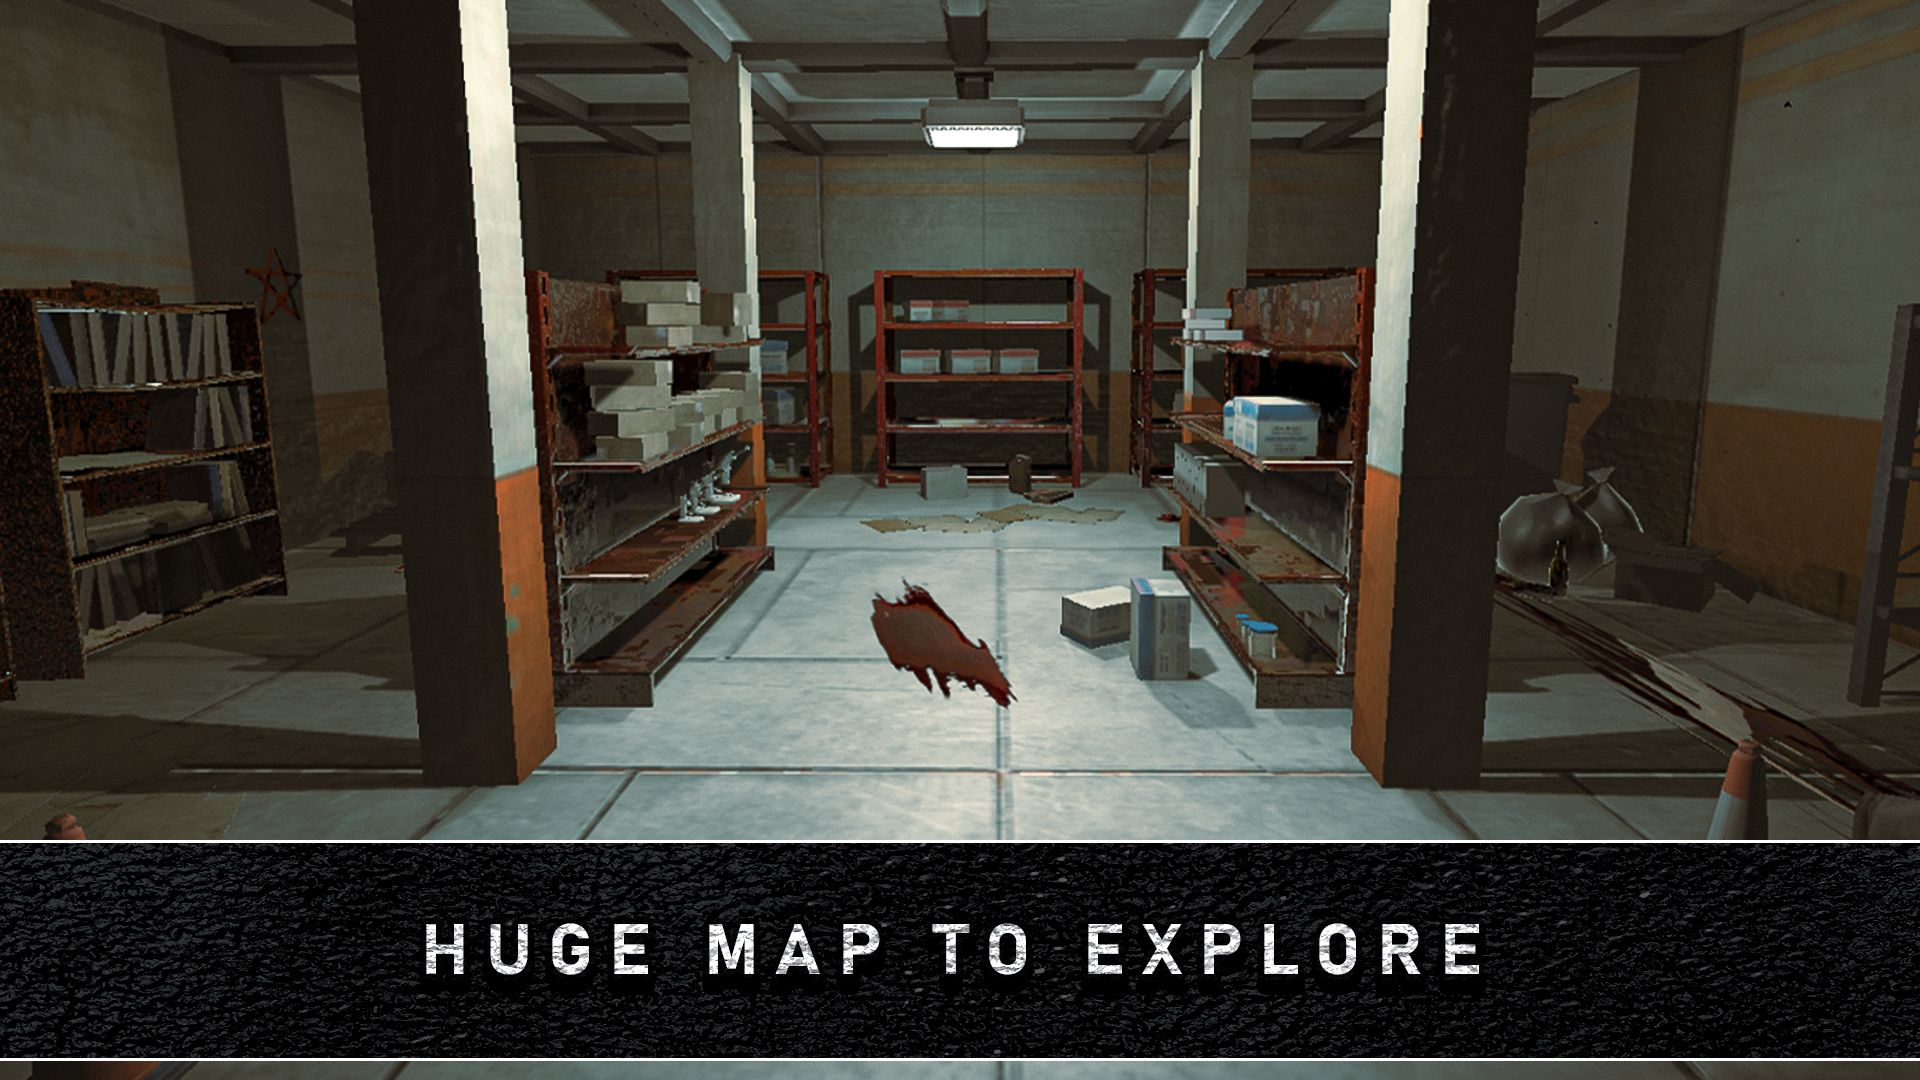 🔥 Download Backrooms Anomaly Horror game 1.5.4 APK . Horror quest